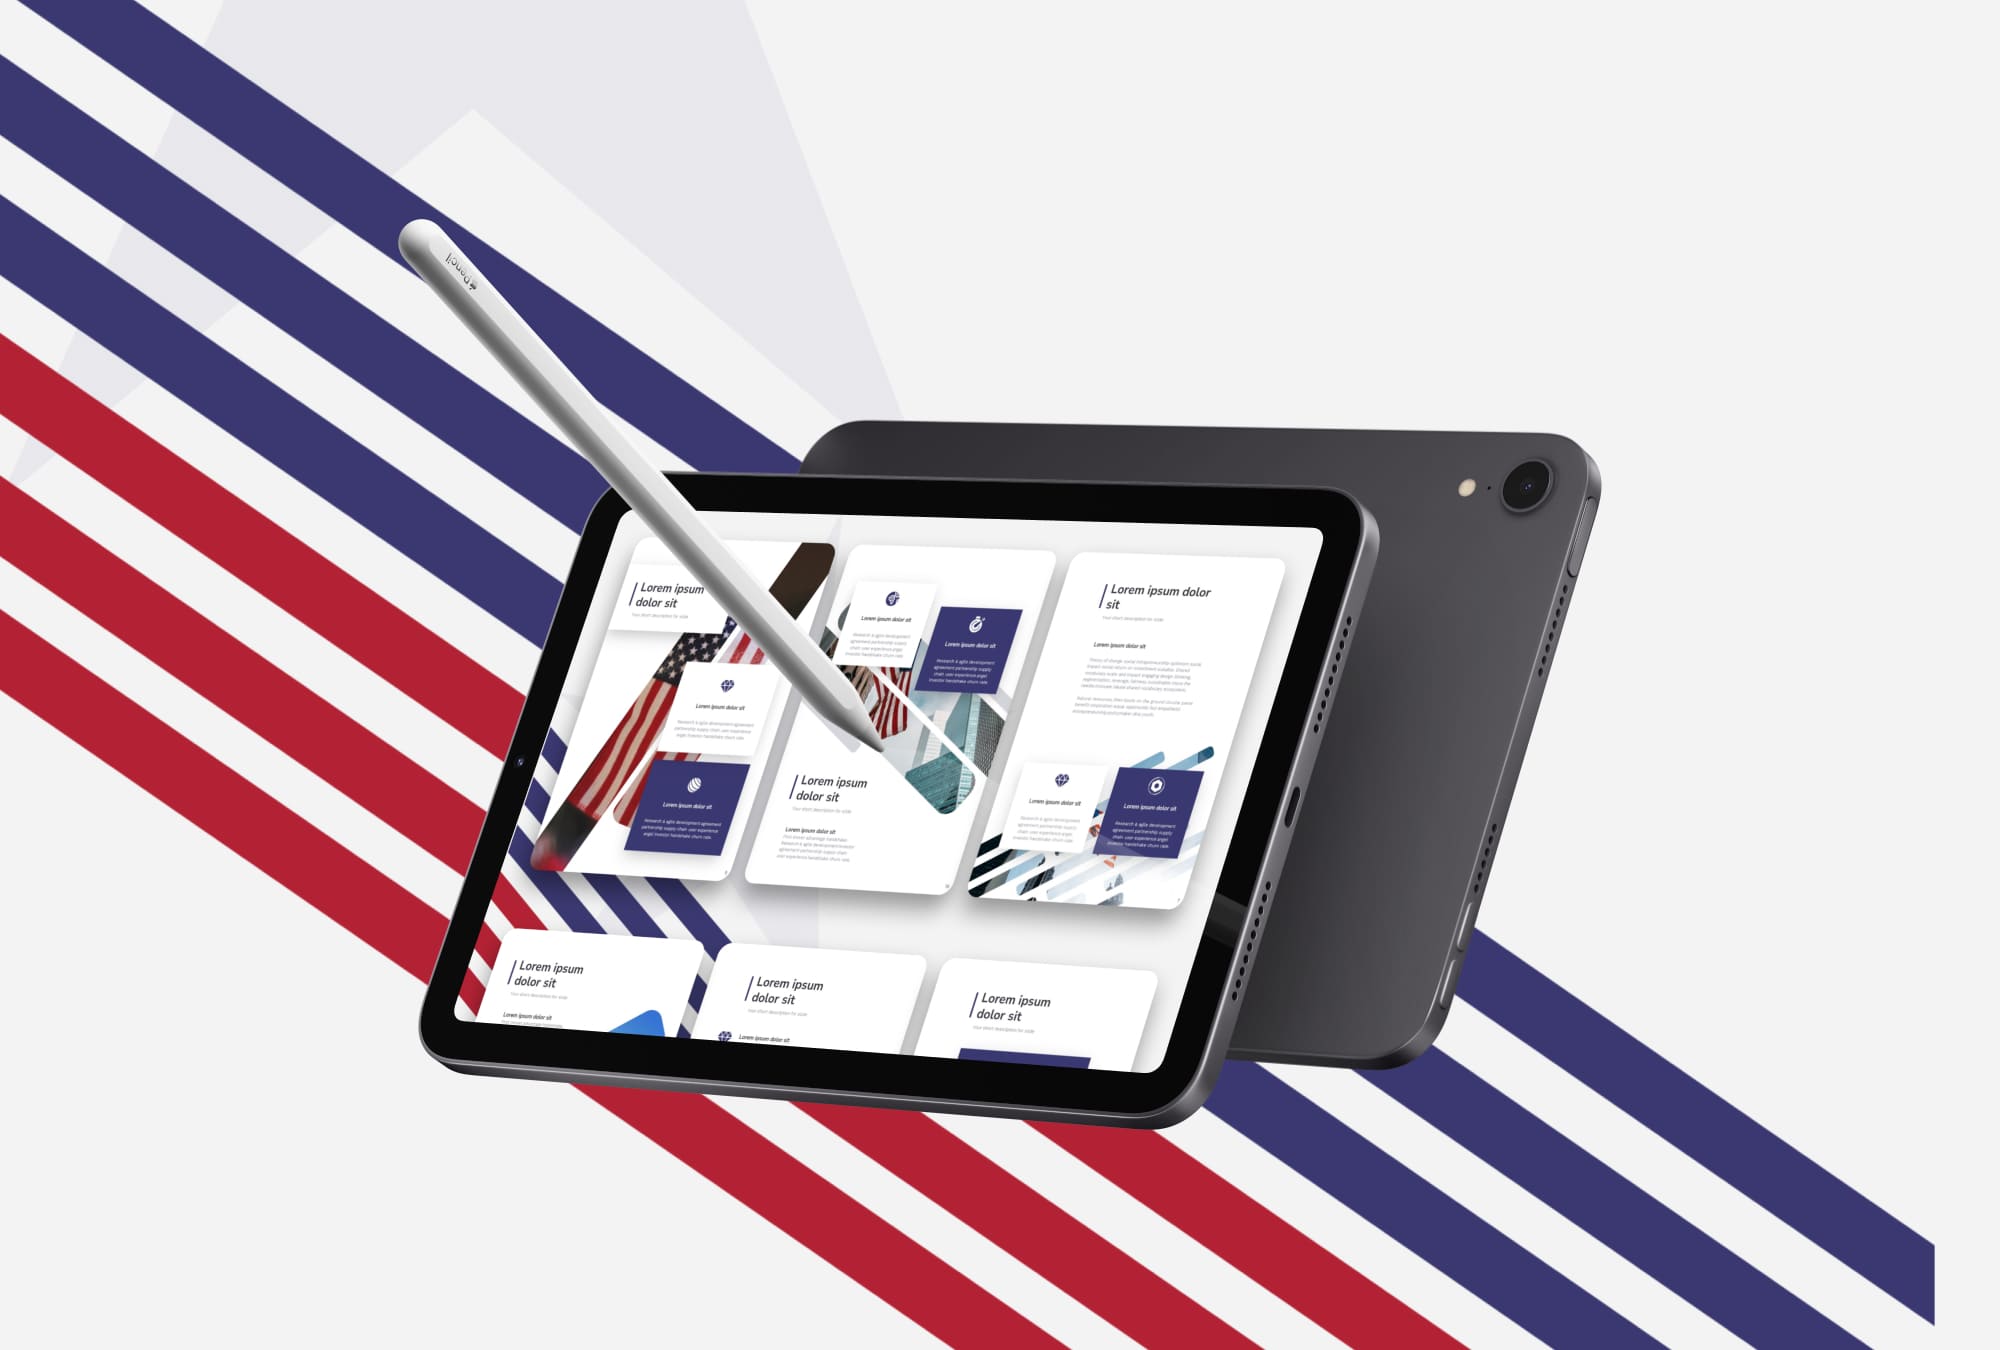 Preview MemorialDay Presentation Template on the tablet.